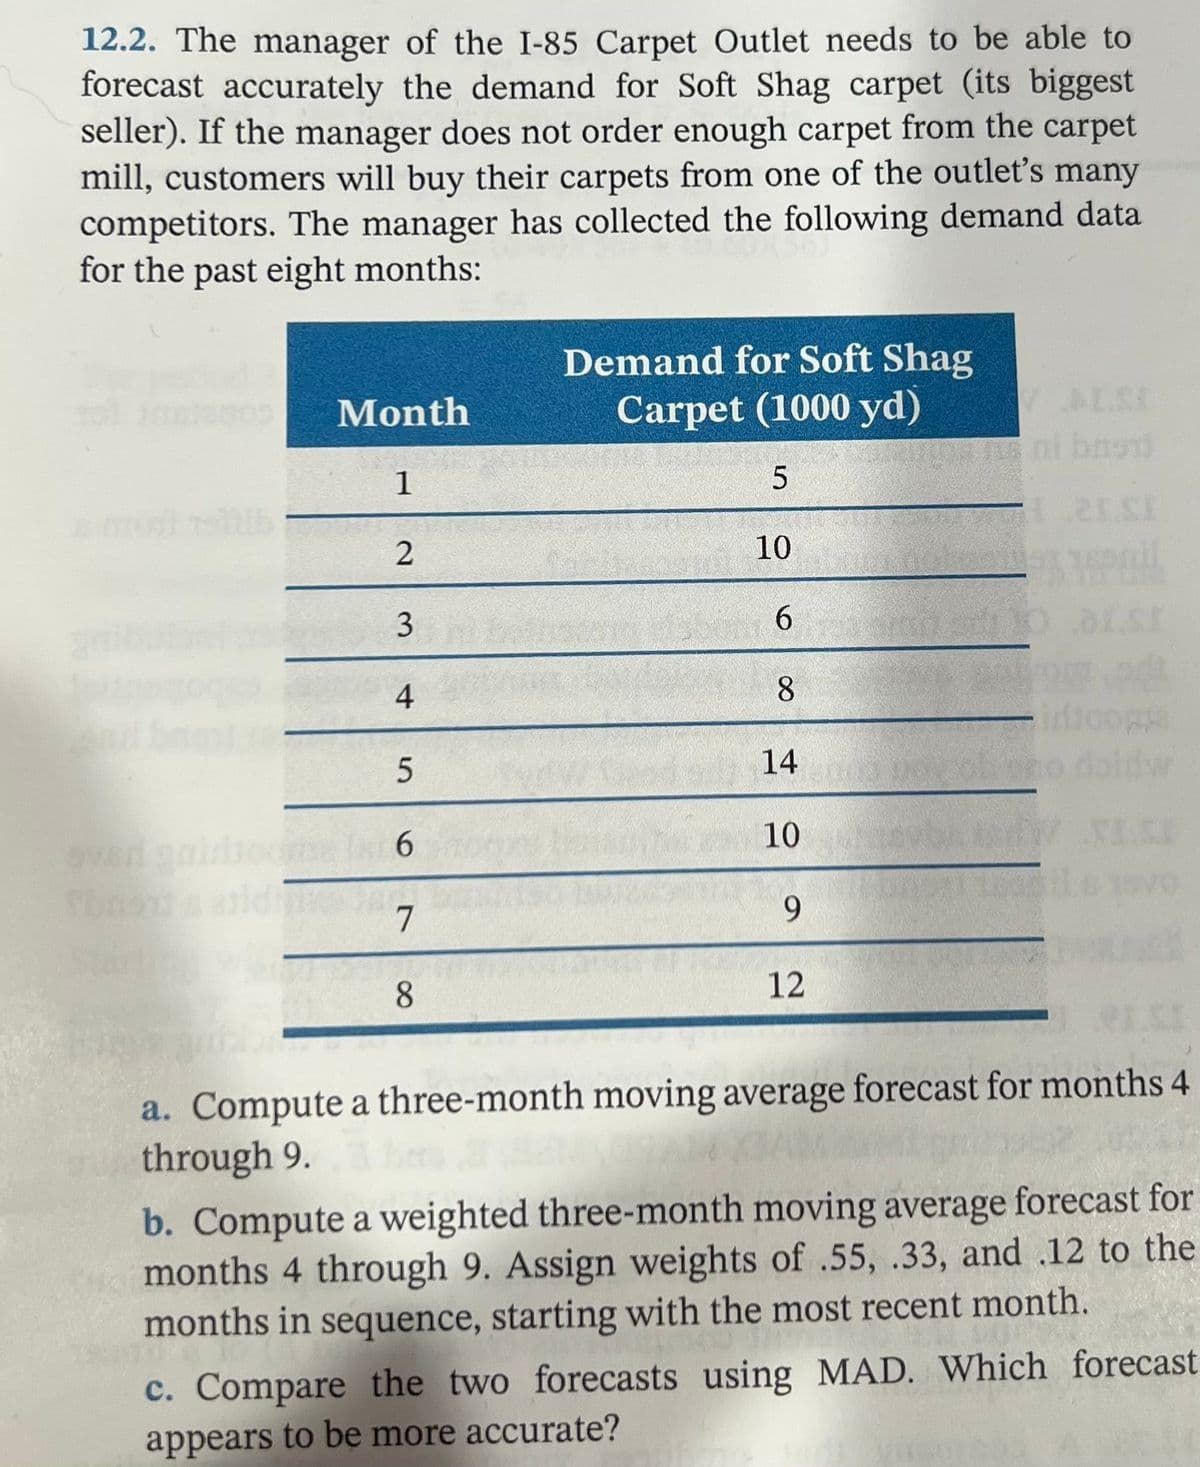 12.2. The manager of the I-85 Carpet Outlet needs to be able to
forecast accurately the demand for Soft Shag carpet (its biggest
seller). If the manager does not order enough carpet from the carpet
mill, customers will buy their carpets from one of the outlet's many
competitors. The manager has collected the following demand data
for the past eight months:
Demand for Soft Shag
Carpet (1000 yd)
Month
ALE
ni bno
1
10
6.
4.
8
14
6.
10
7
9.
8.
12
a. Compute a three-month moving average forecast for months 4
through 9.
b. Compute a weighted three-month moving average forecast for
months 4 through 9. Assign weights of .55, .33, and .12 to the
months in sequence, starting with the most recent month.
c. Compare the two forecasts using MAD. Which forecast
appears to be more accurate?
3.
